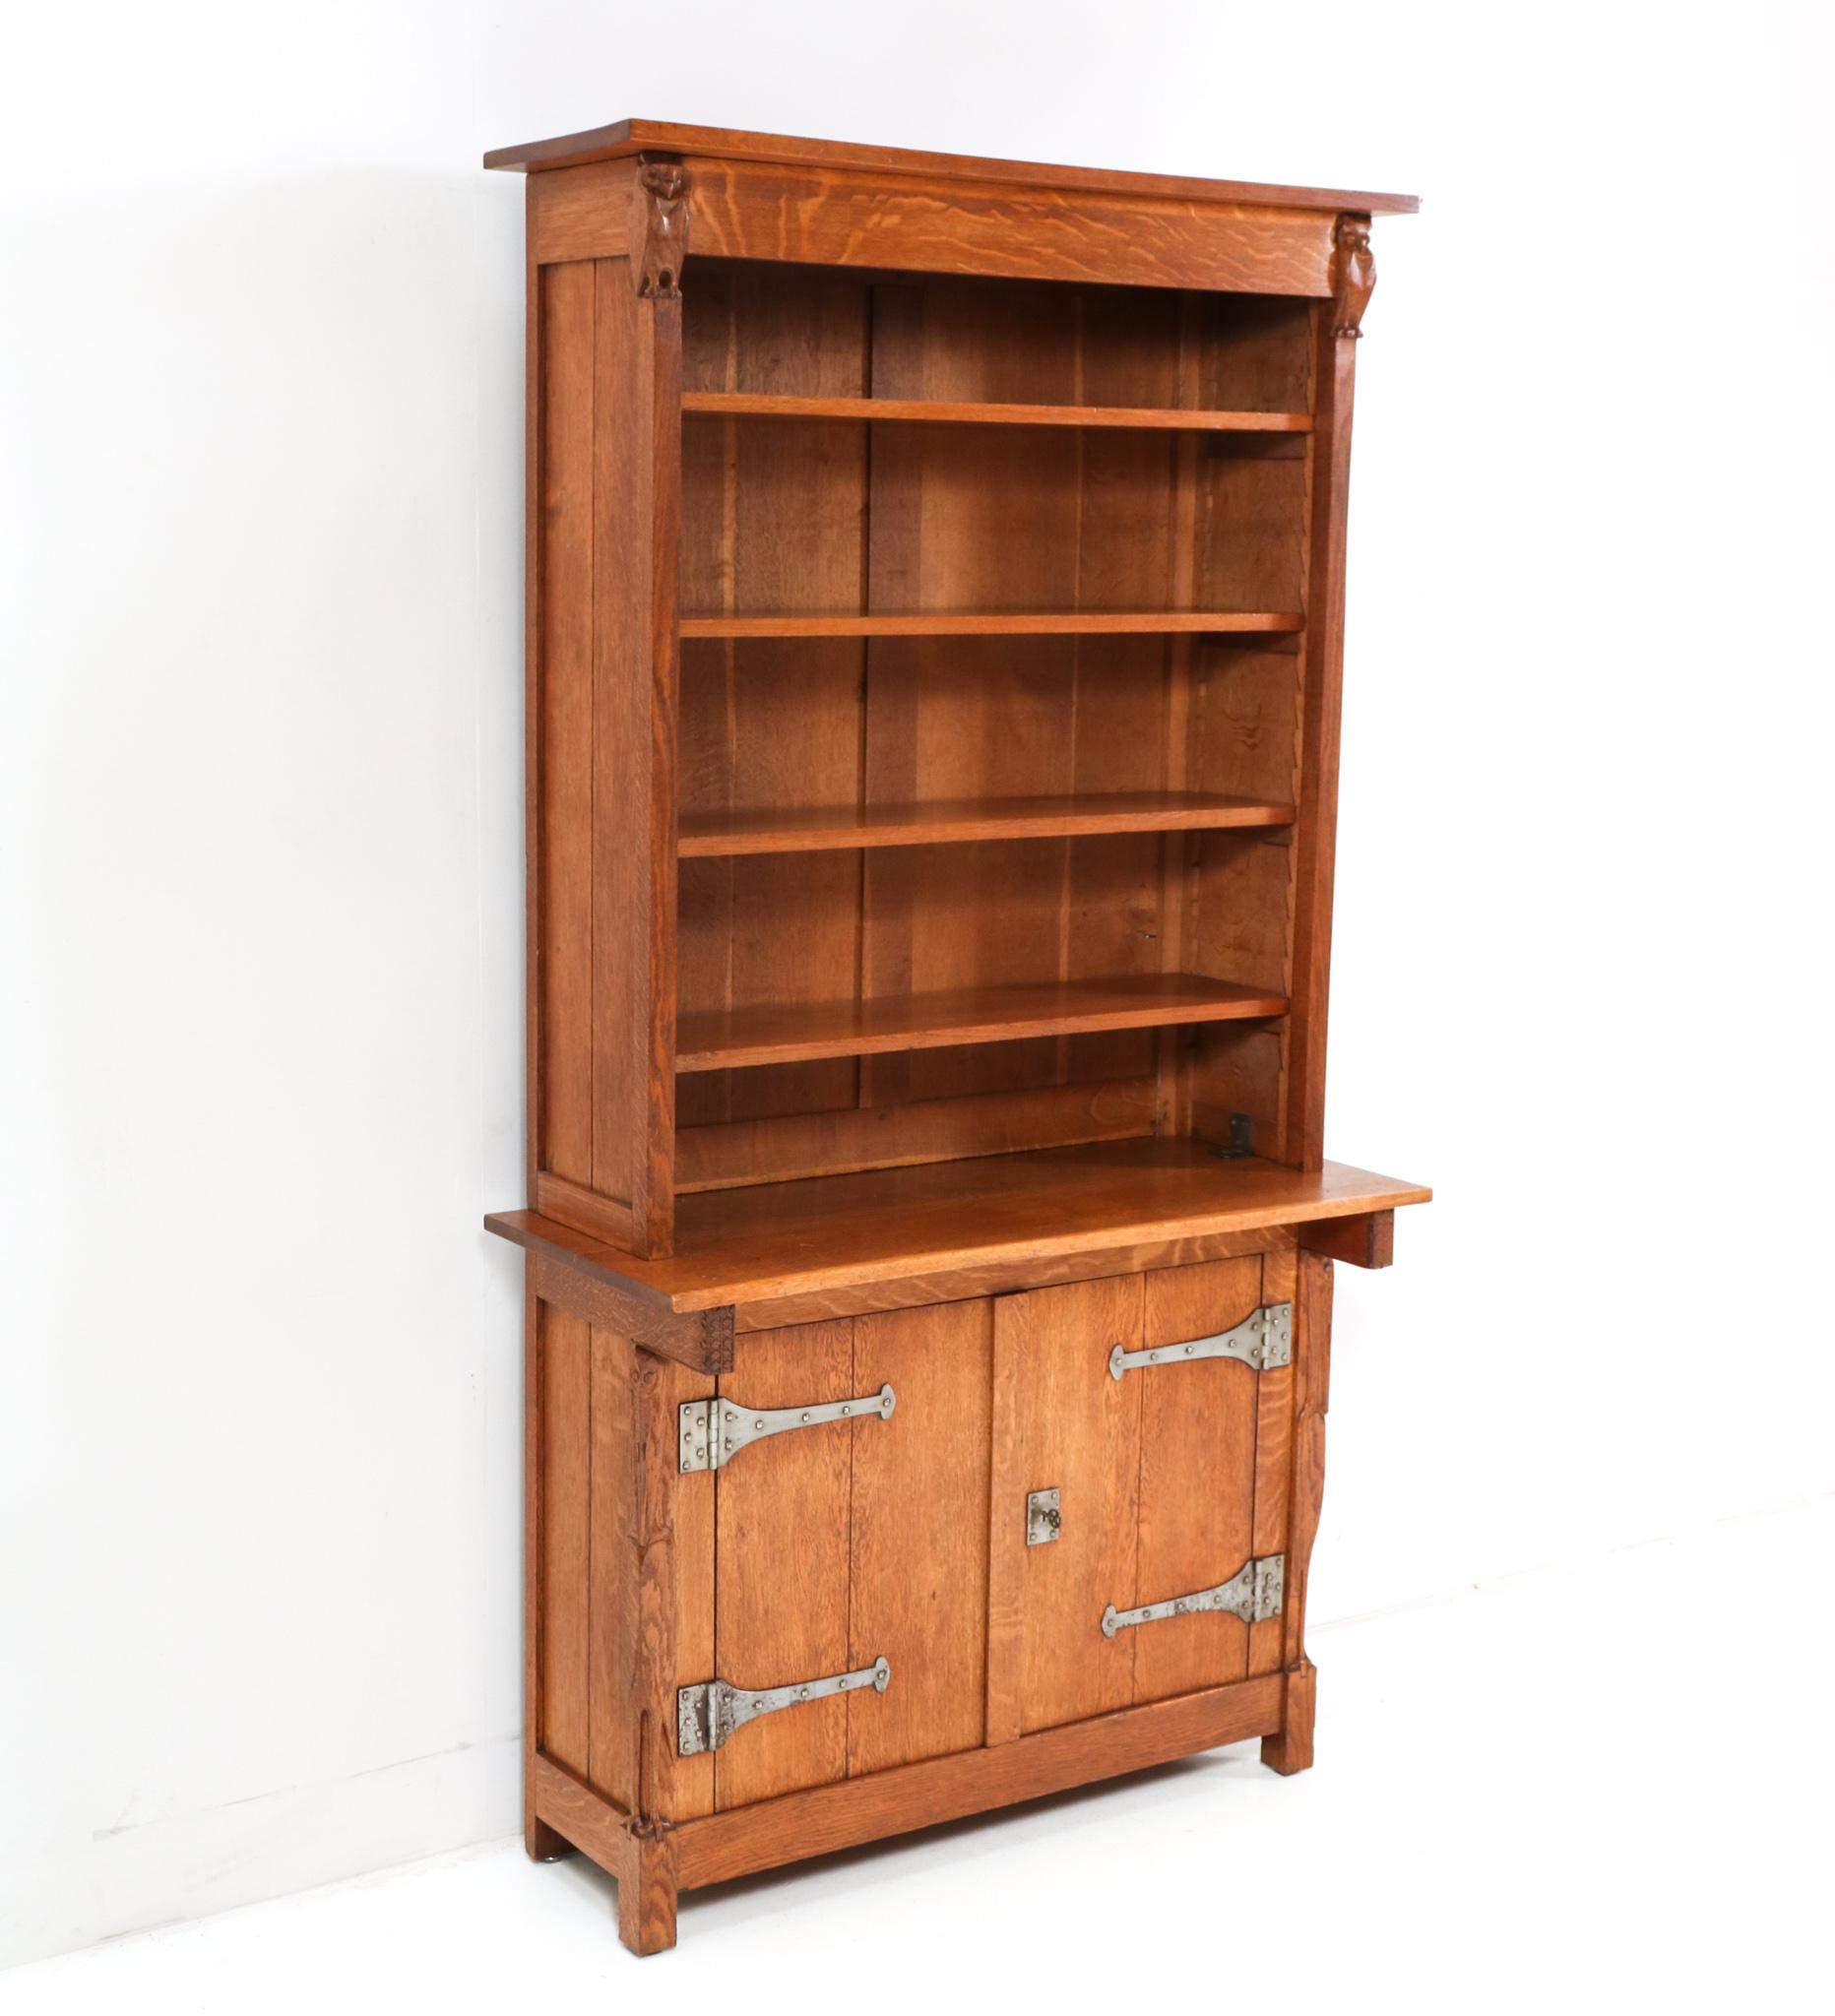 Magnificent and ultra rare Arts & Crafts two-piece bookcase.
Design by Alexander J. Kropholler.
Striking Dutch design from the 1890s.
Executed in solid oak and original wrought iron, this stunning and one of a kind 
 museum piece has two